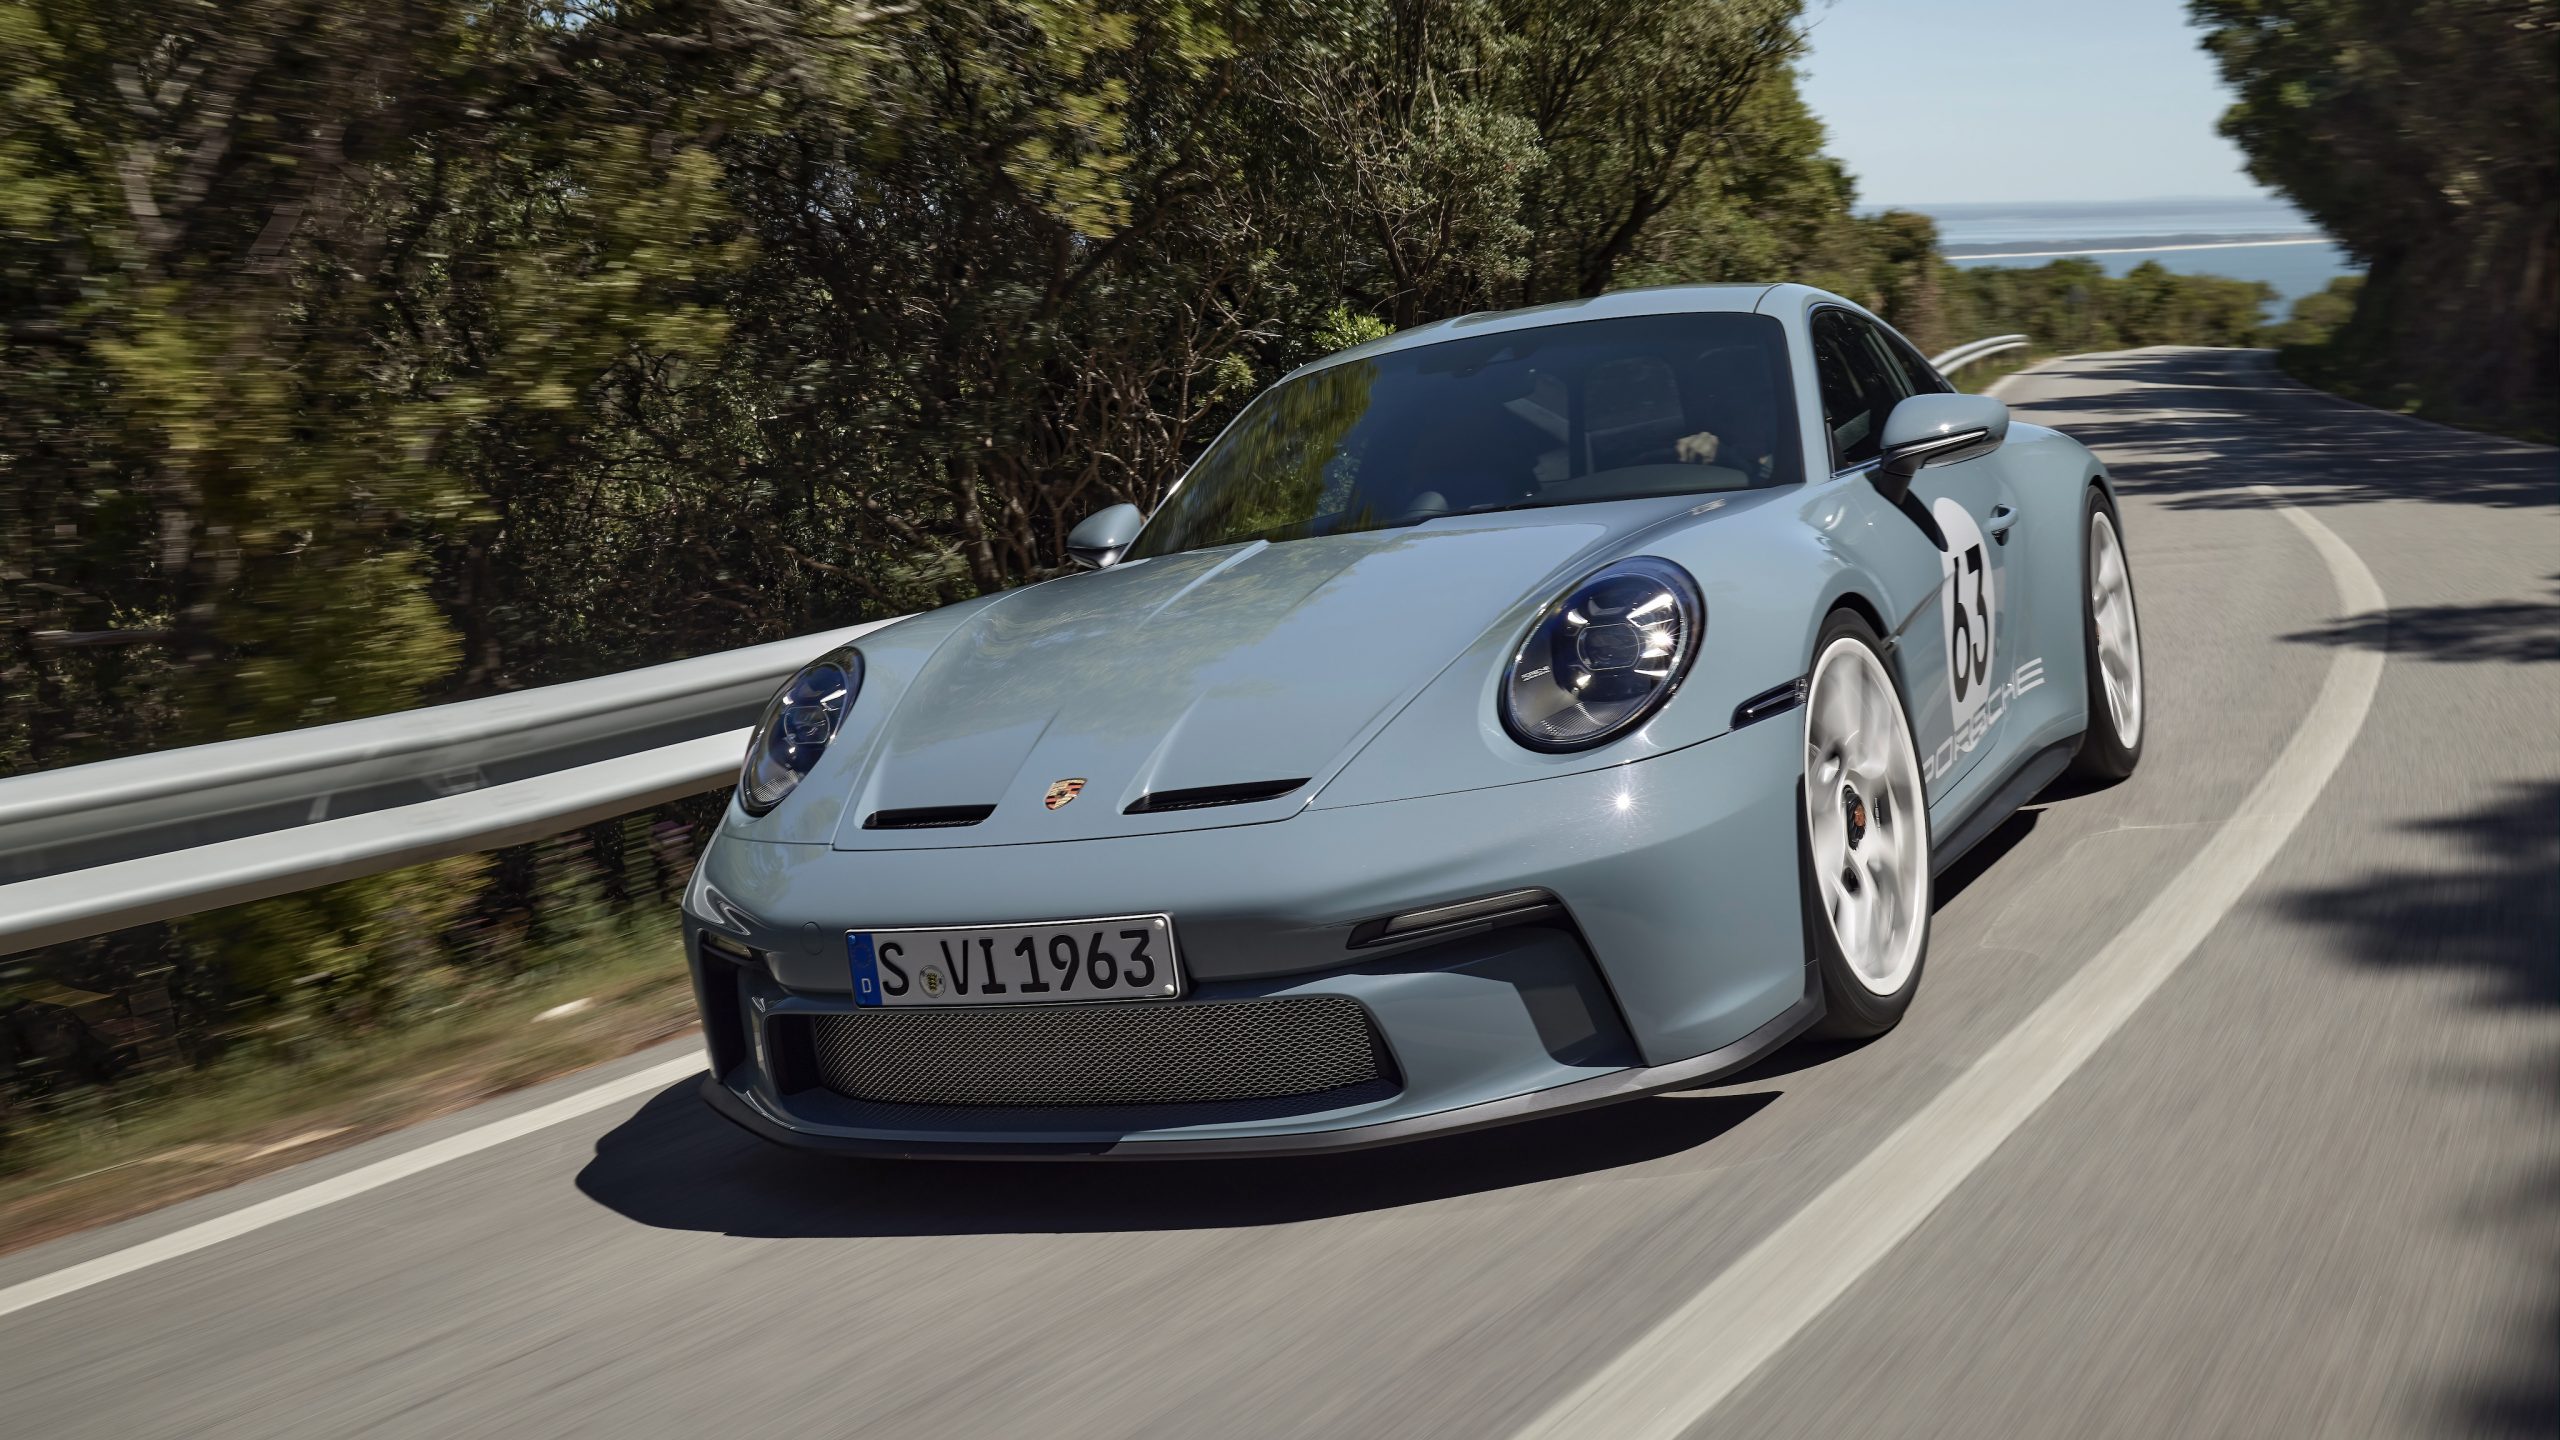 Less weight, more cost for the new Porsche 911 S/T